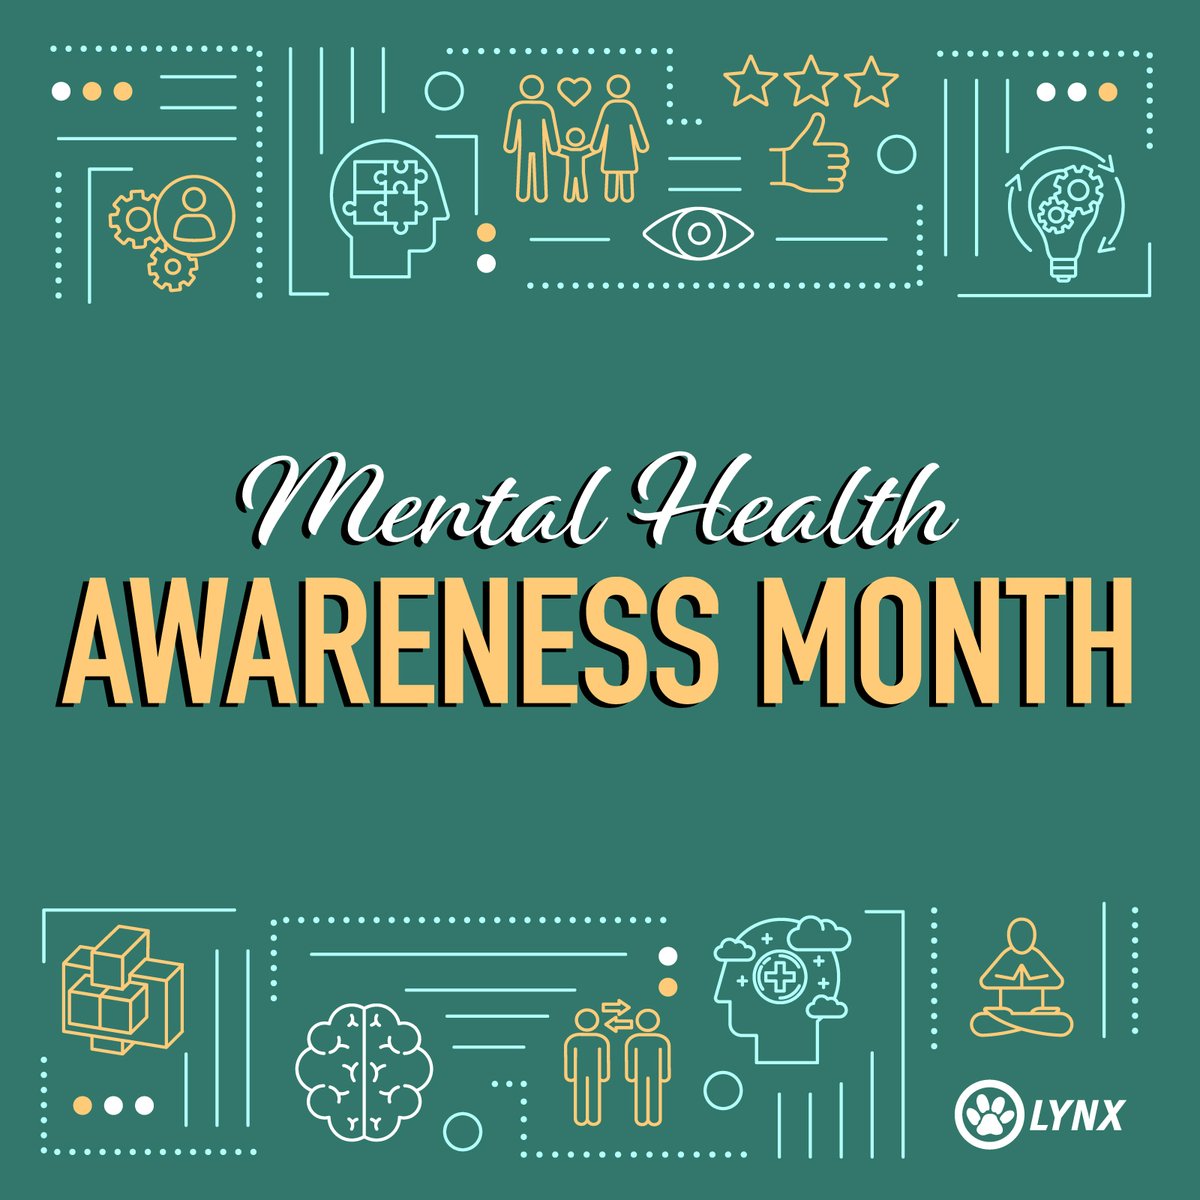 It's okay to not be okay sometimes. We all have our struggles and it's important to prioritize our mental well-being and support each other with kindness. Together, we can create a more understanding and supportive community. #MentalHealthAwarenessMonth